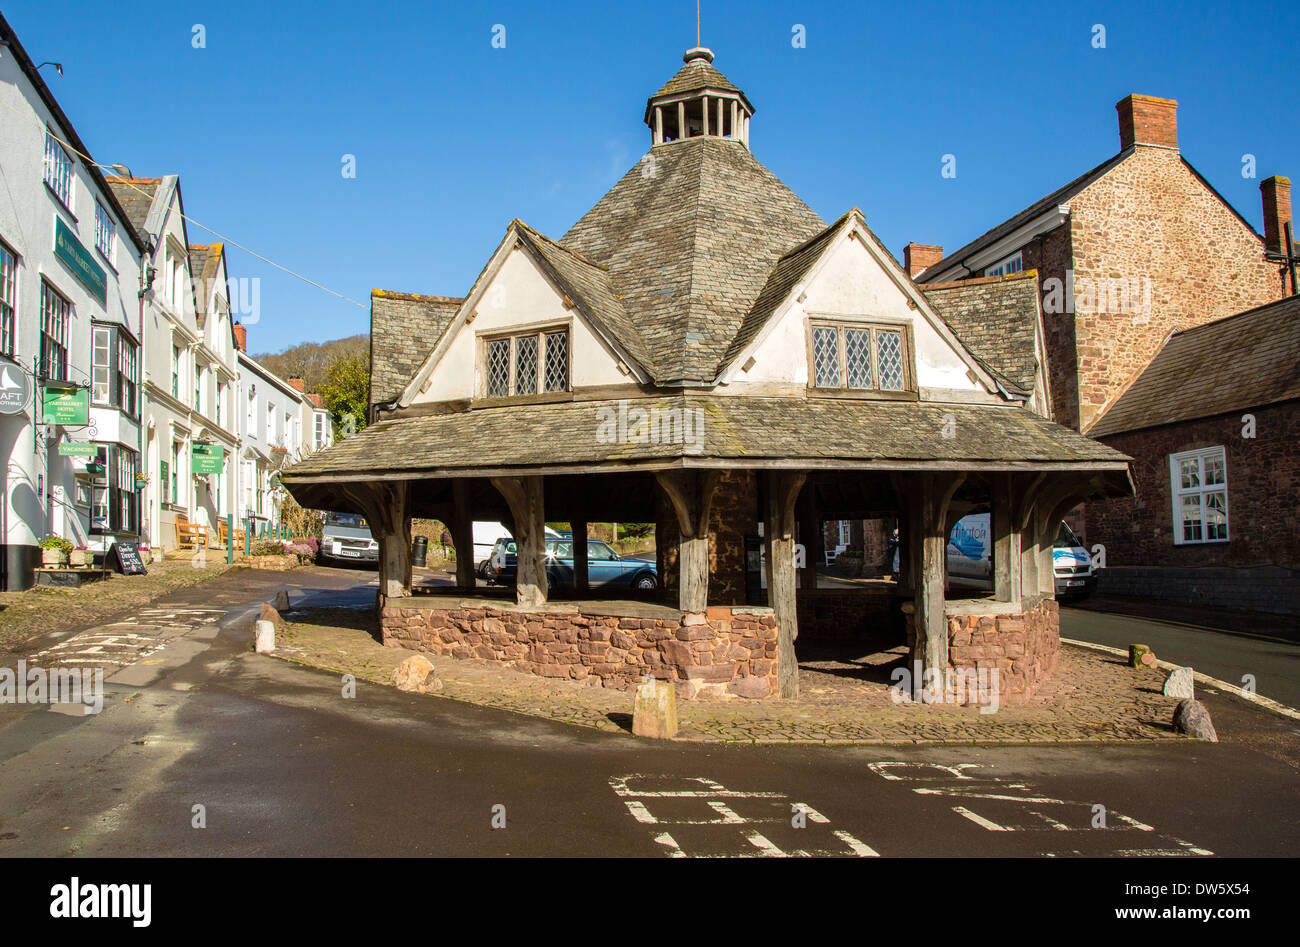 The medieval Yarn Market on the main street of Dunster in West Somerset UK with unique hexagonal gabled roof Stock Photo